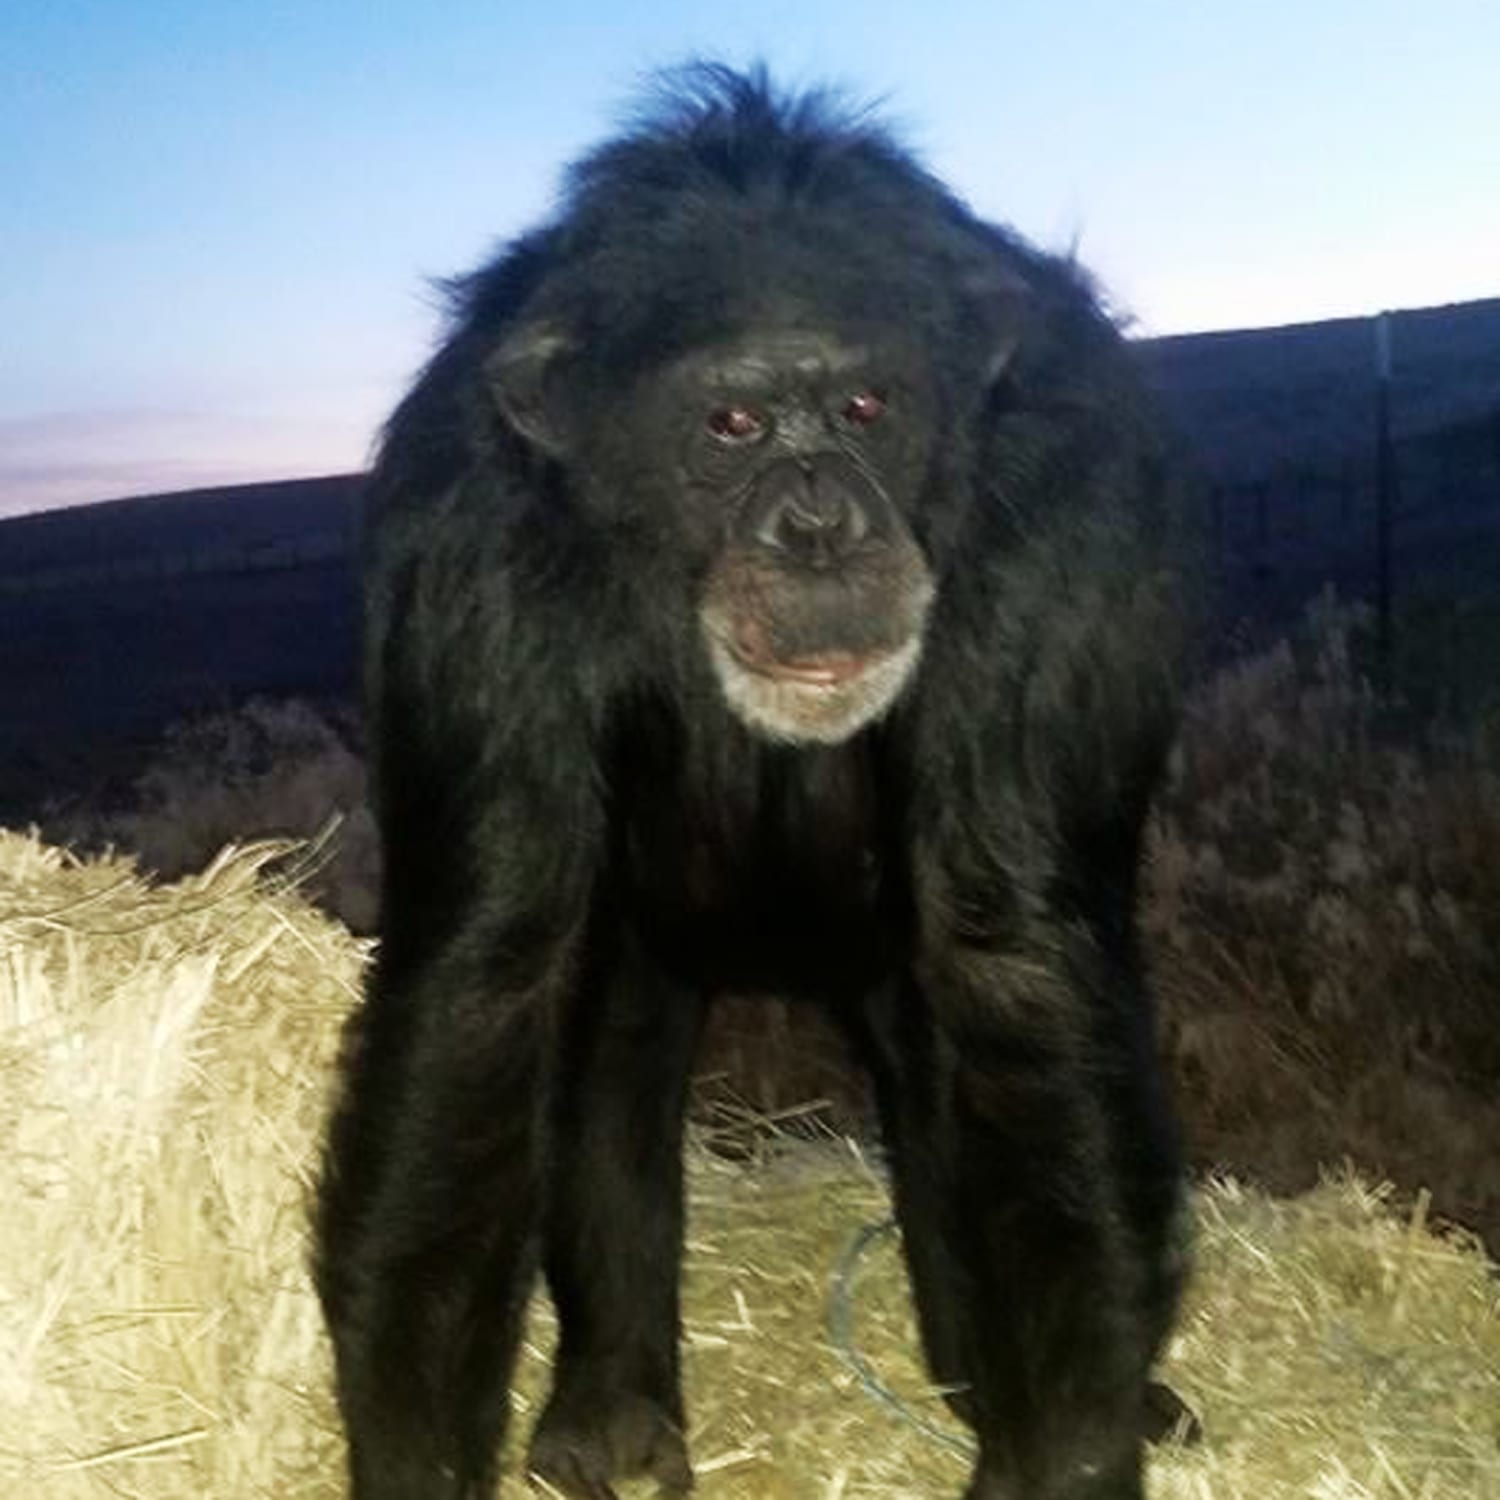 Oregon deputy fatally shoots chimpanzee after it bites owner's daughter